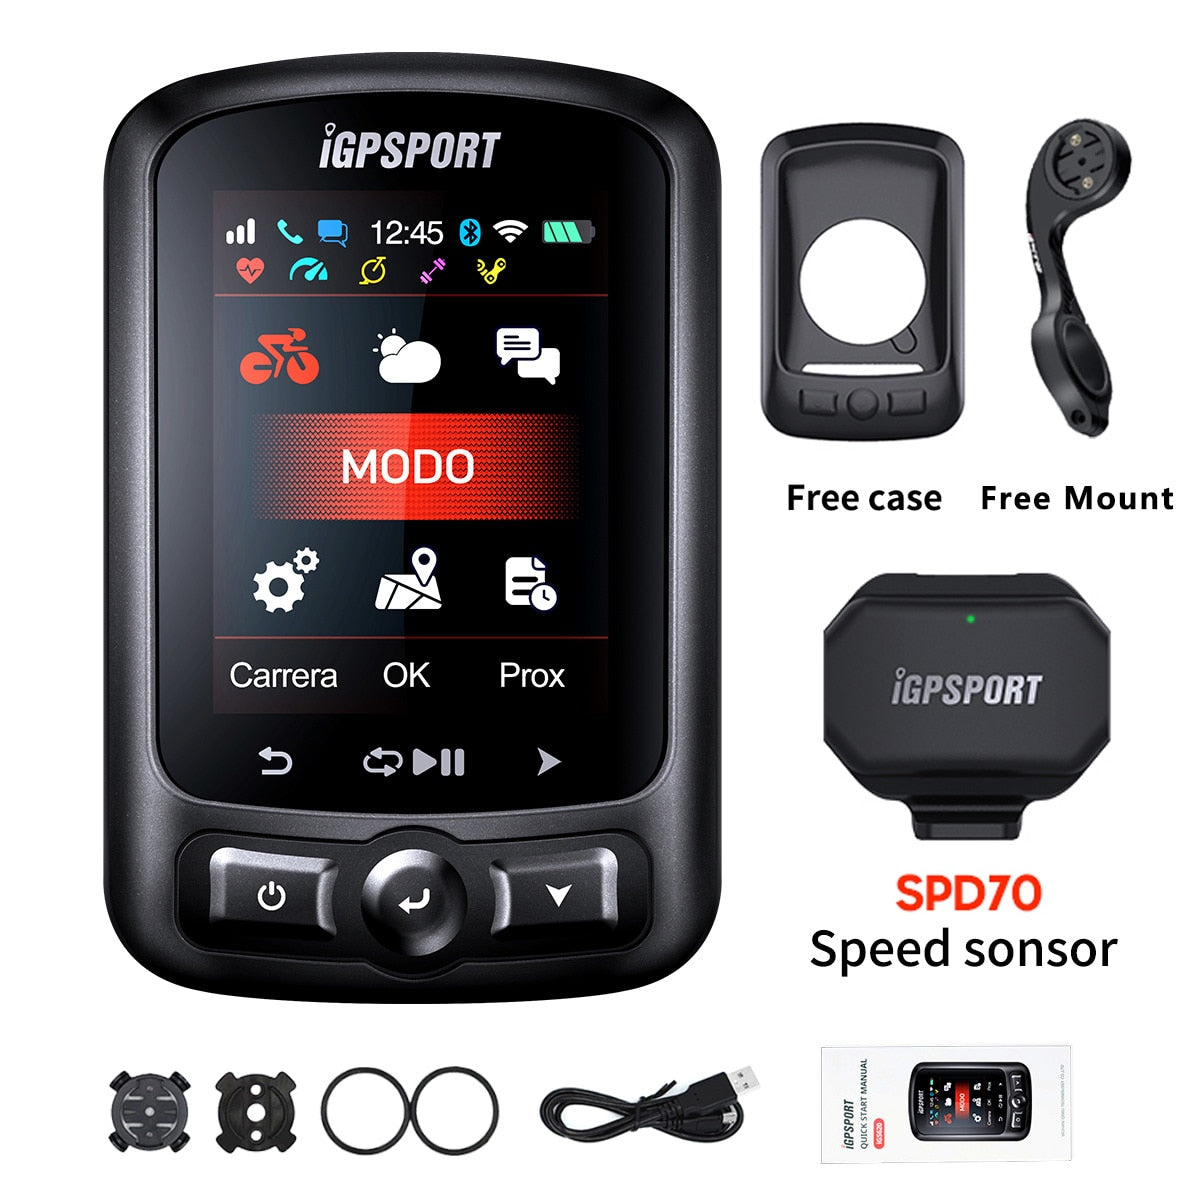 IGS620 iGPSPORT Igs 620 Cycle Computer Navigation Speedometer Outdoor Riding Sensor Accessories GPS Wholesale with candence